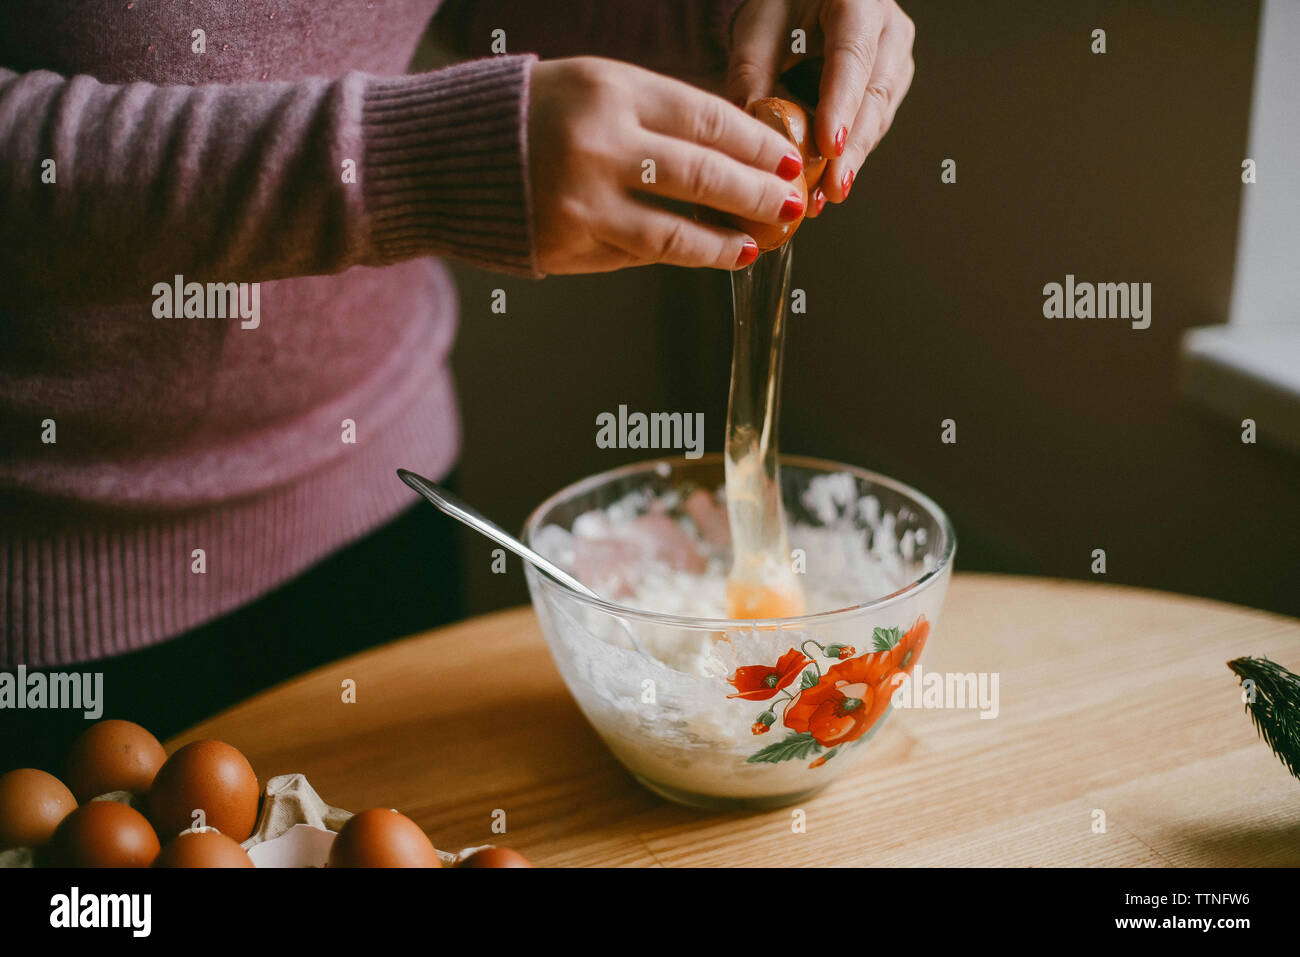 Mixing Banana Bread In Orange Bowl With Wooden Spoon Stock Photo, Picture  and Royalty Free Image. Image 8823227.